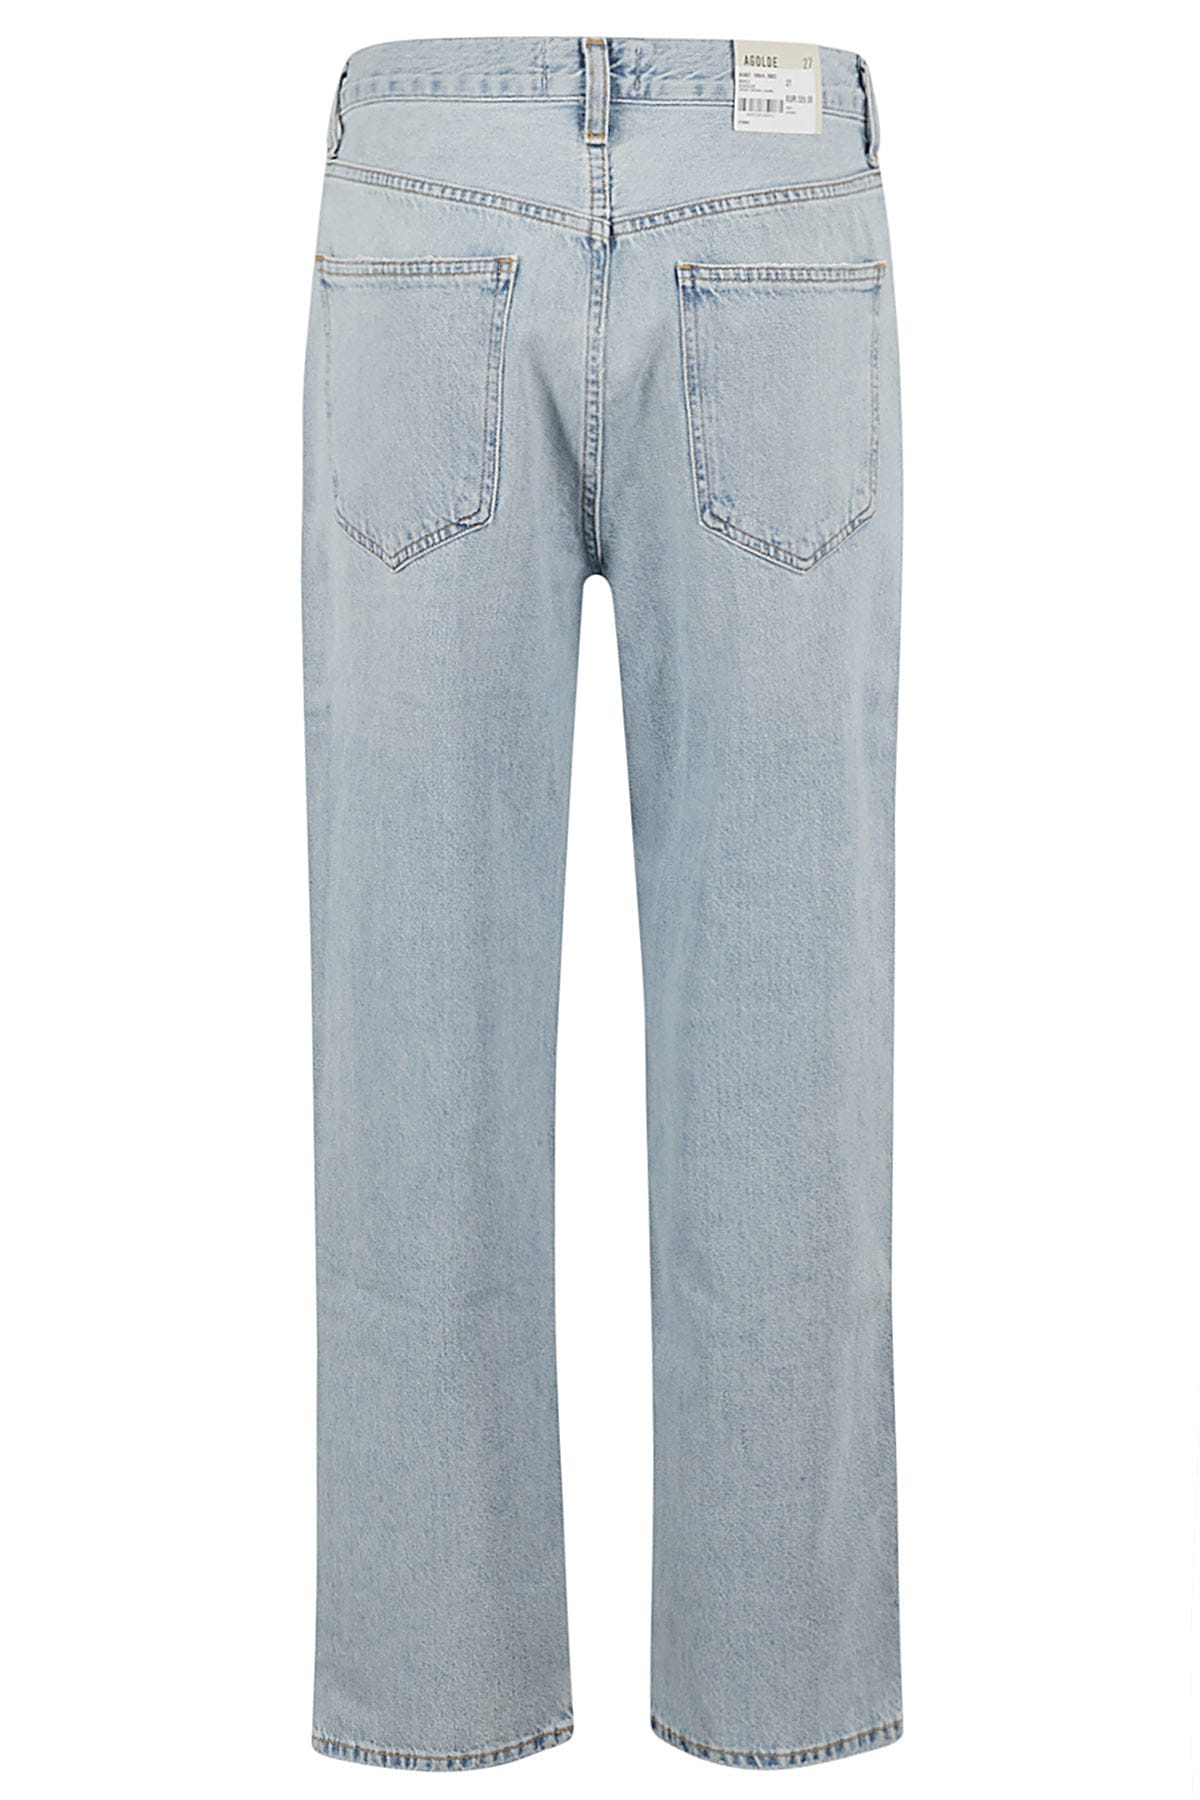 Shop Agolde Criss Cross Jeans In Wired